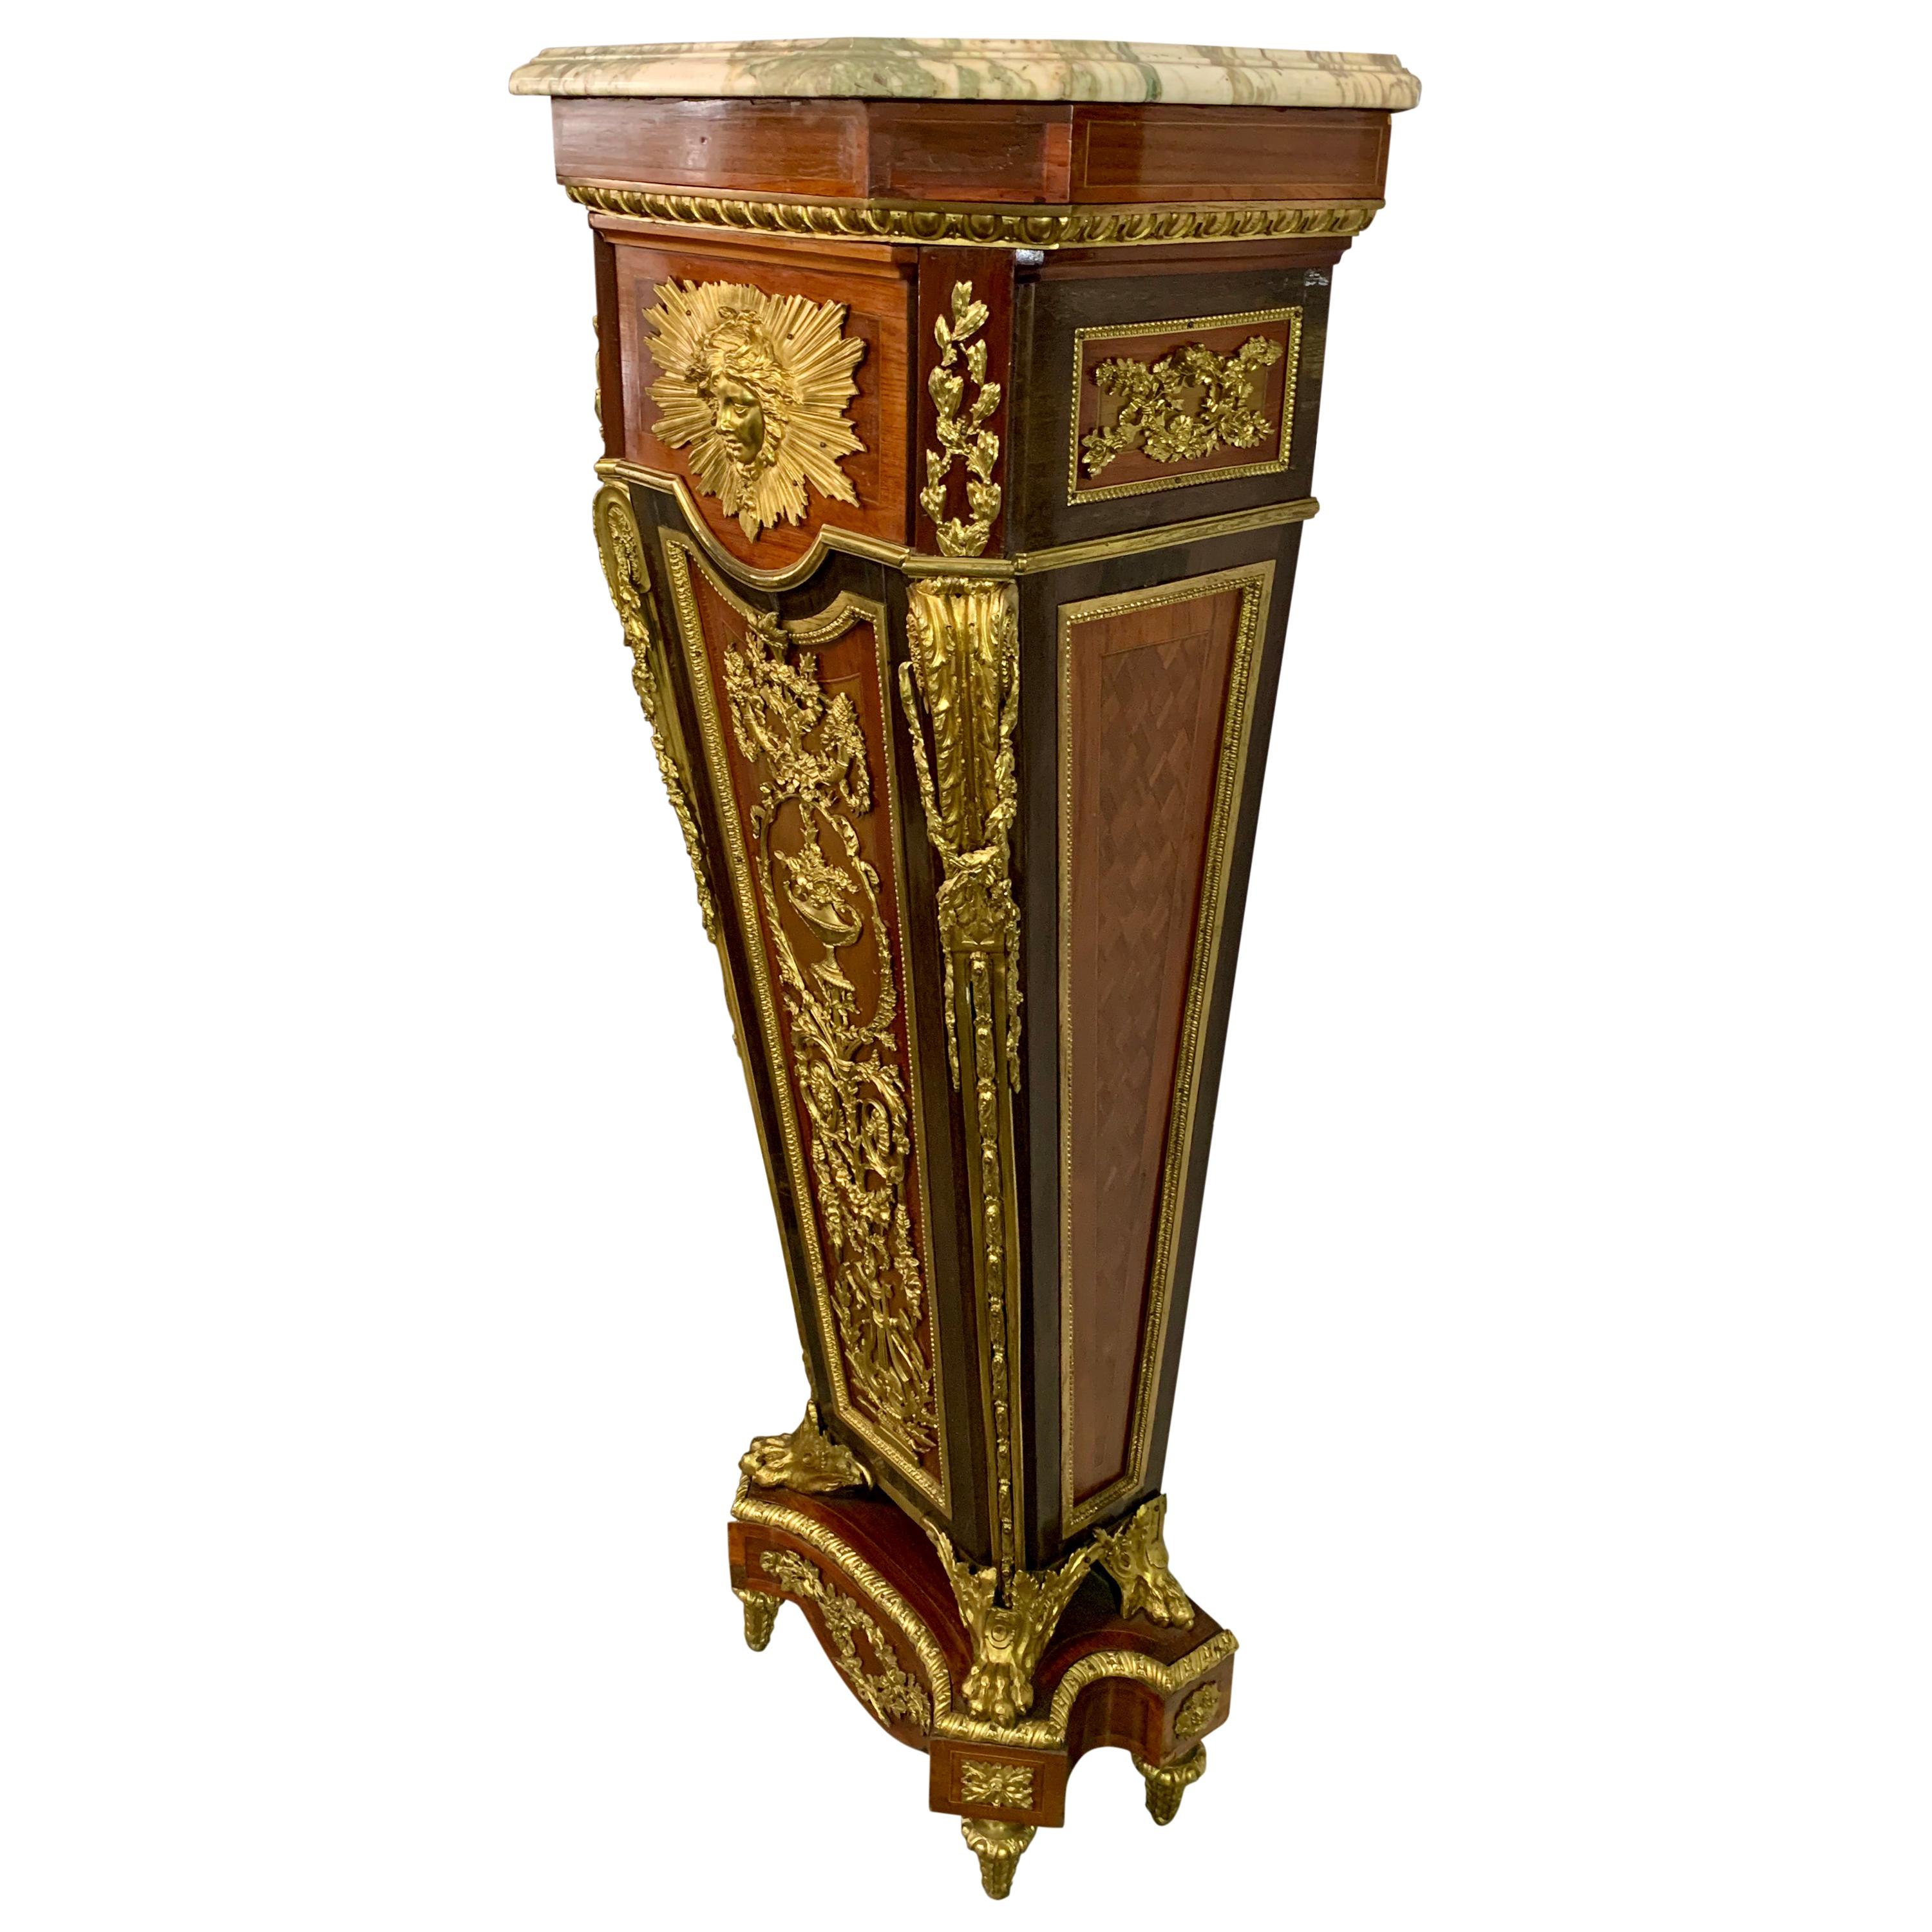 This wall-side gilt bronze mounted pedestal with stepped veined marble top with canted front corners, above the rectangular upper section centred by a Mercury mask and sunburst with crossed lower branches, the angles with an acanthus-cast scrolled